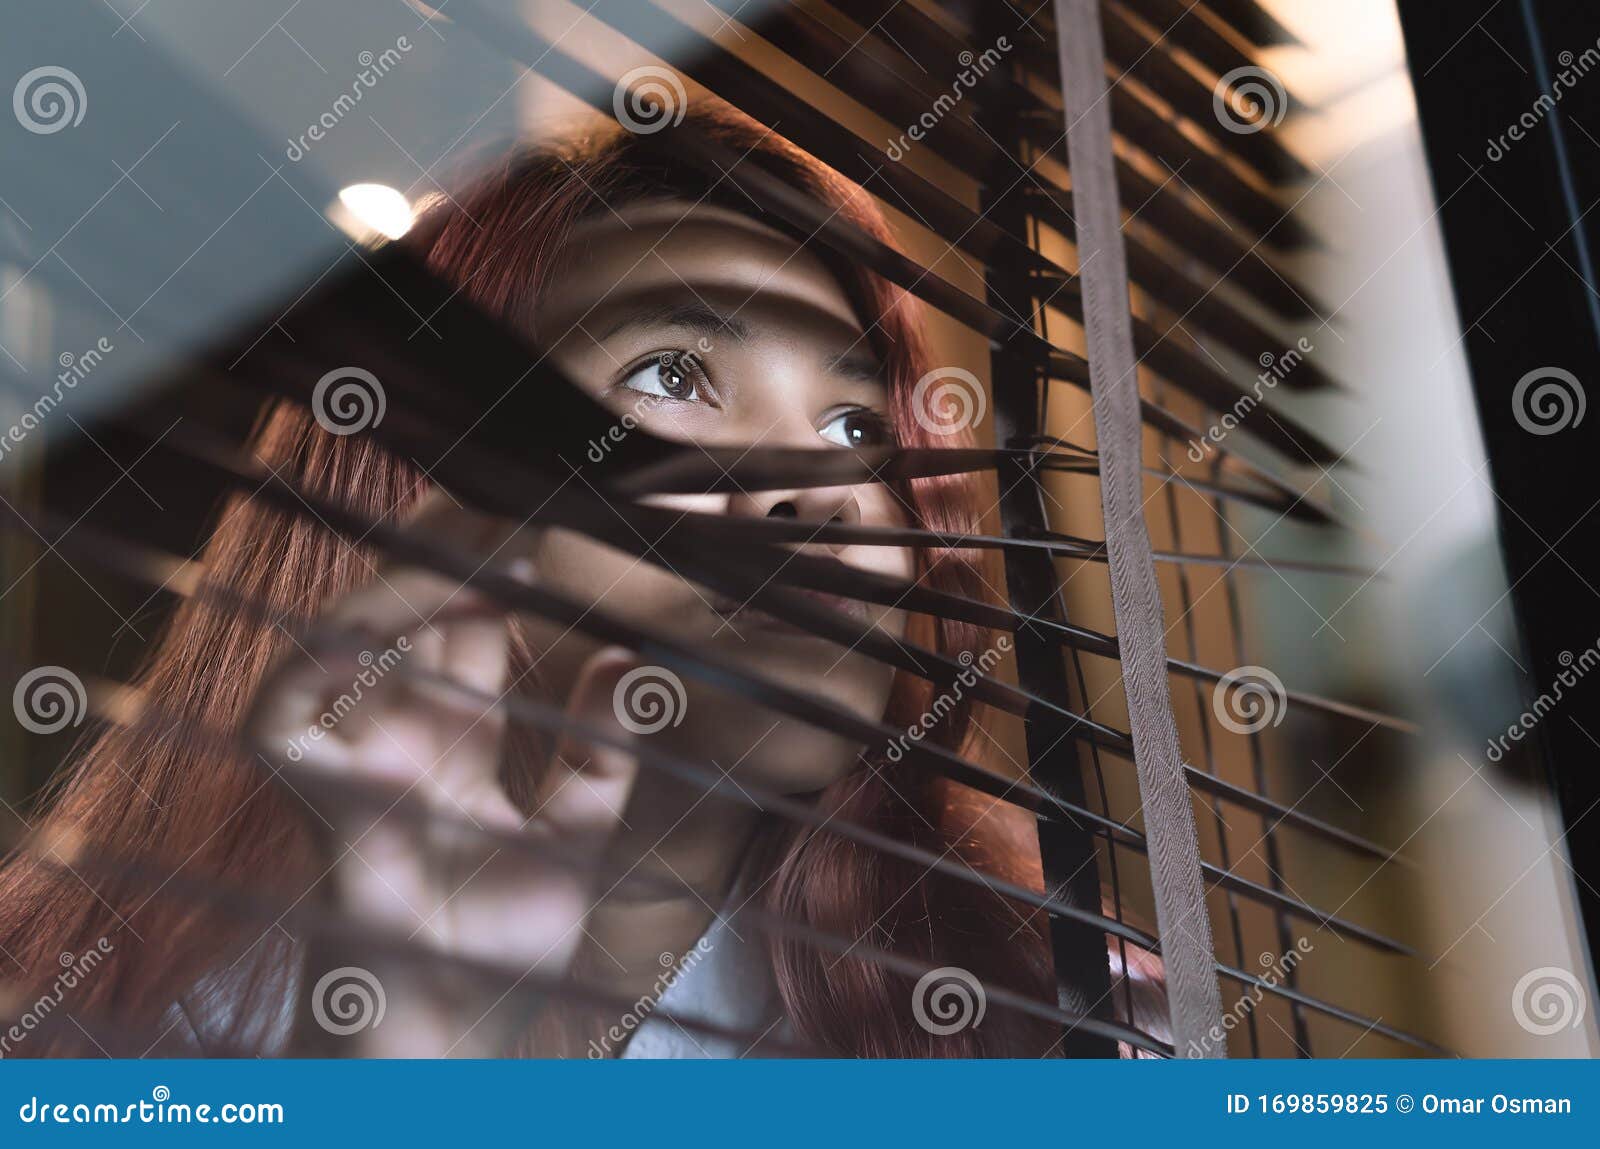 197 Peeping Blinds Stock Photos picture pic